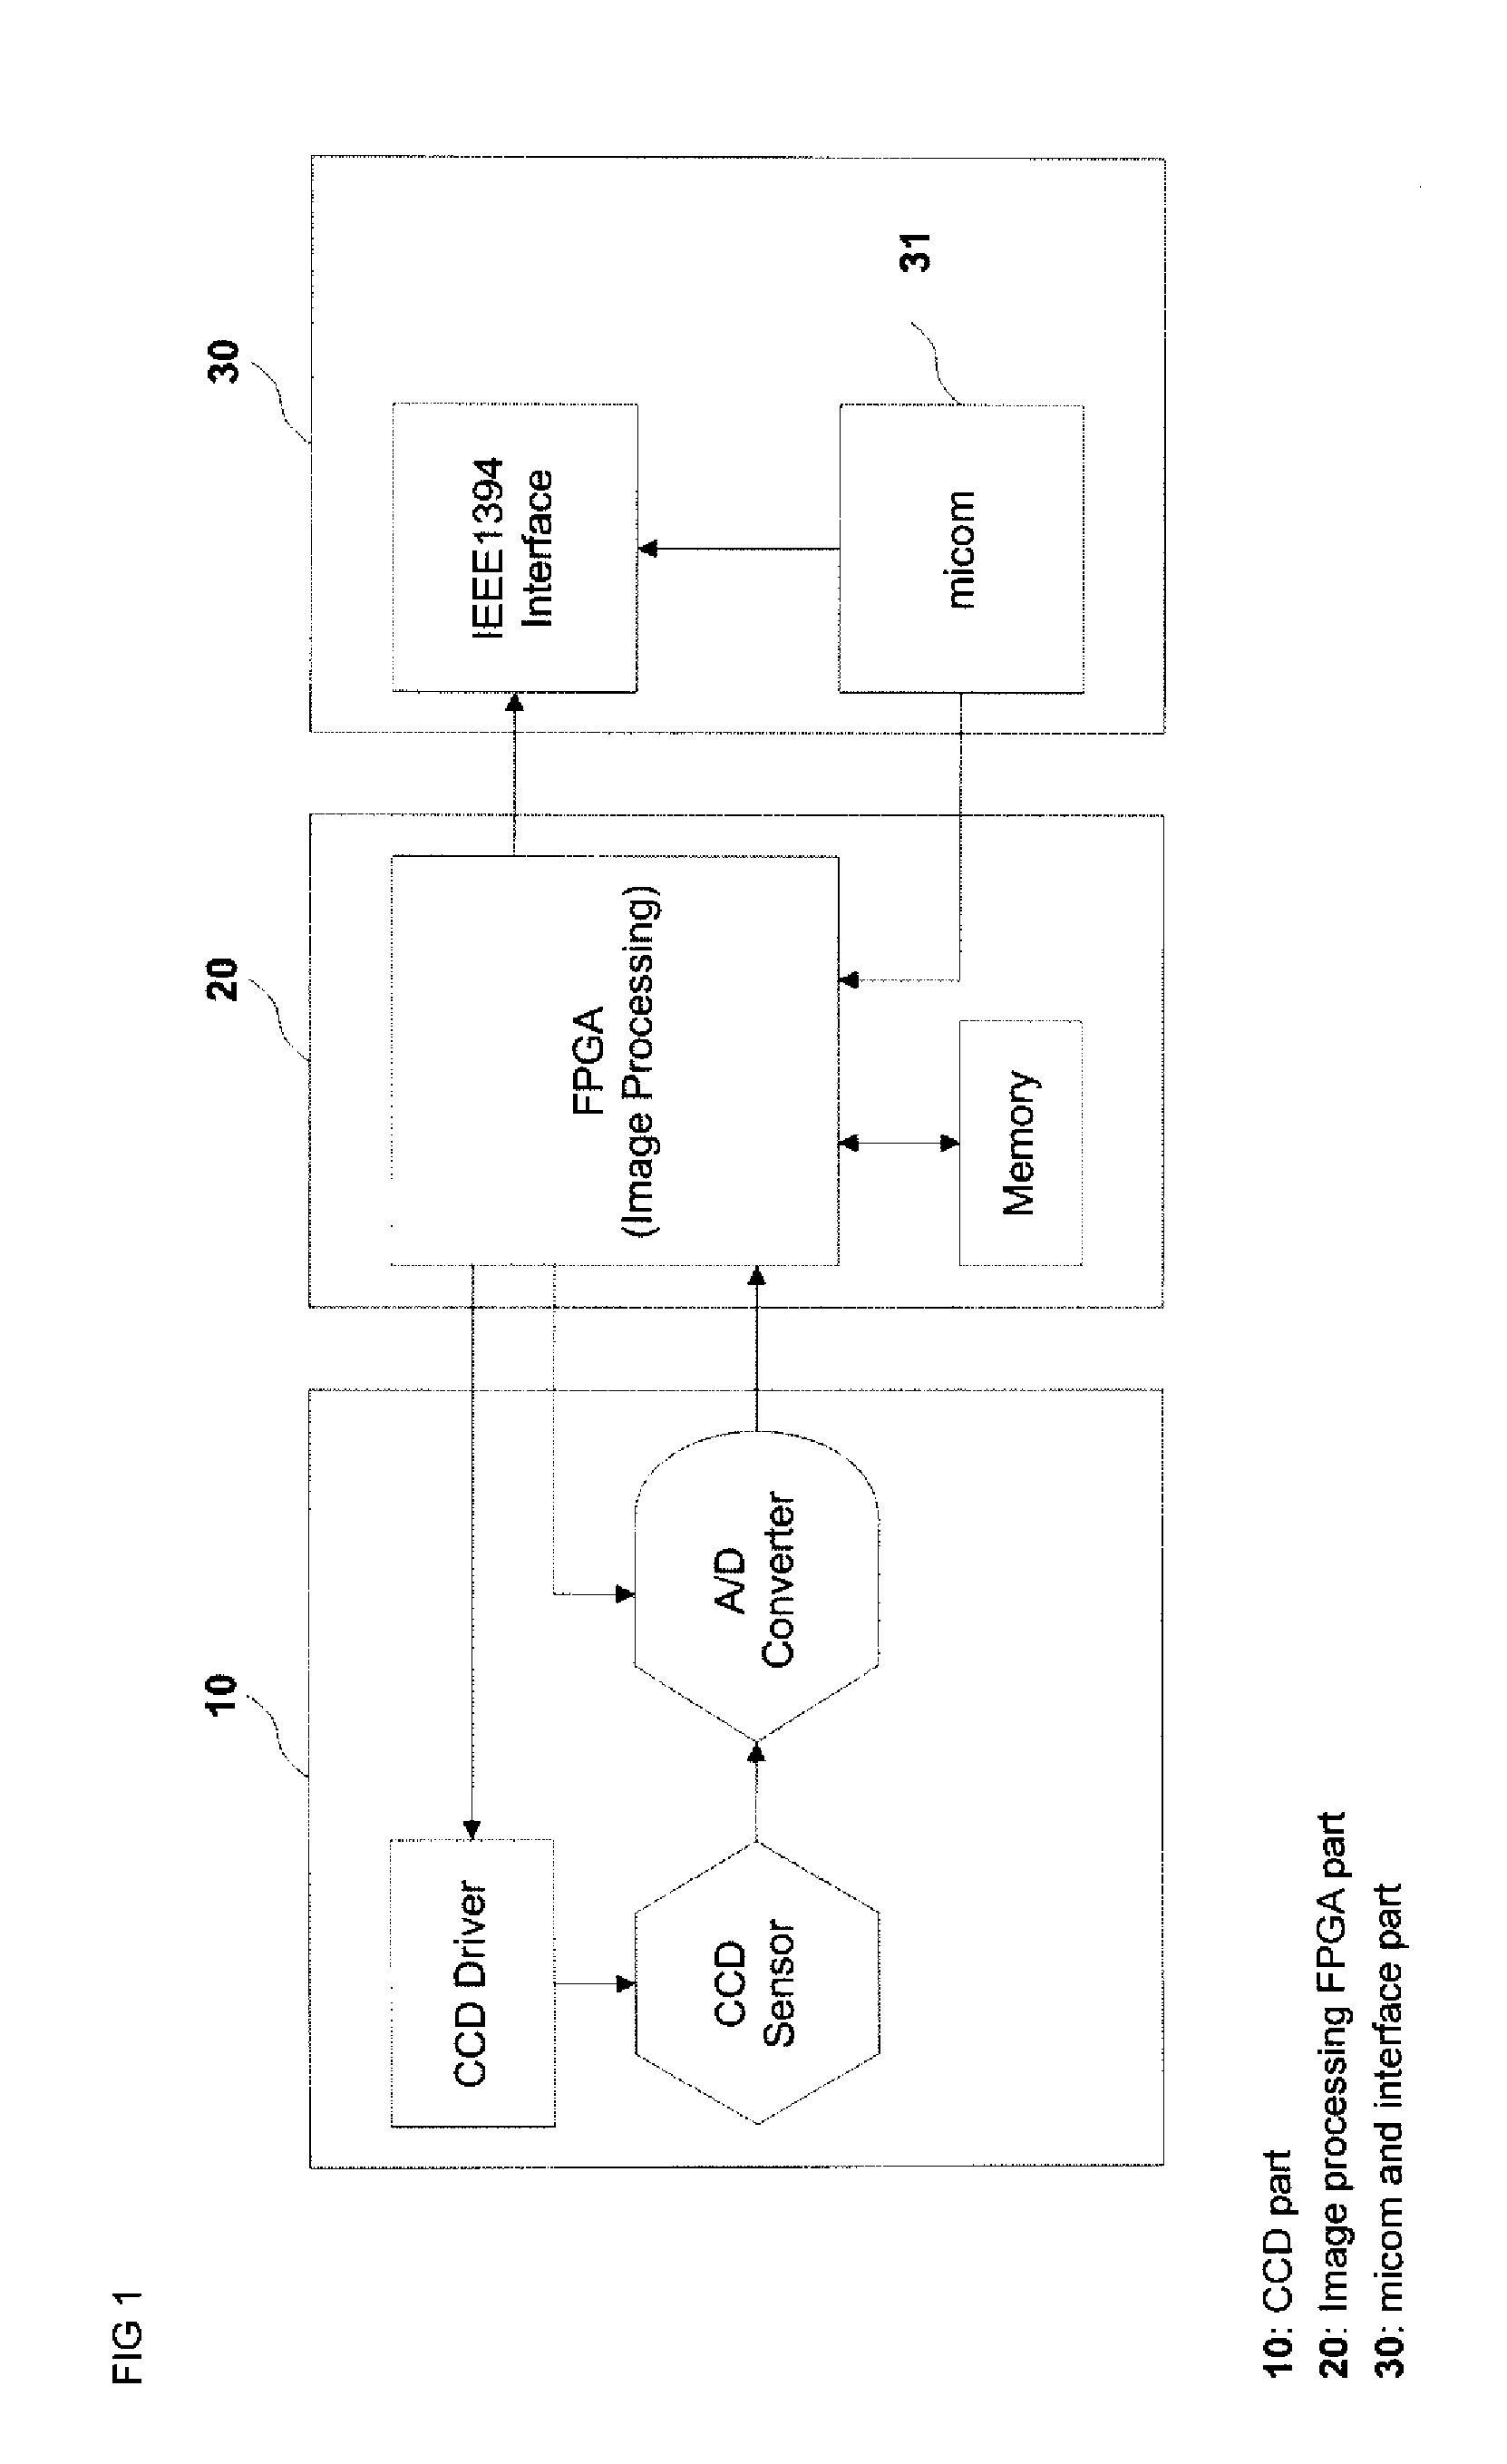 Camera control method for vehicle number plate recognition